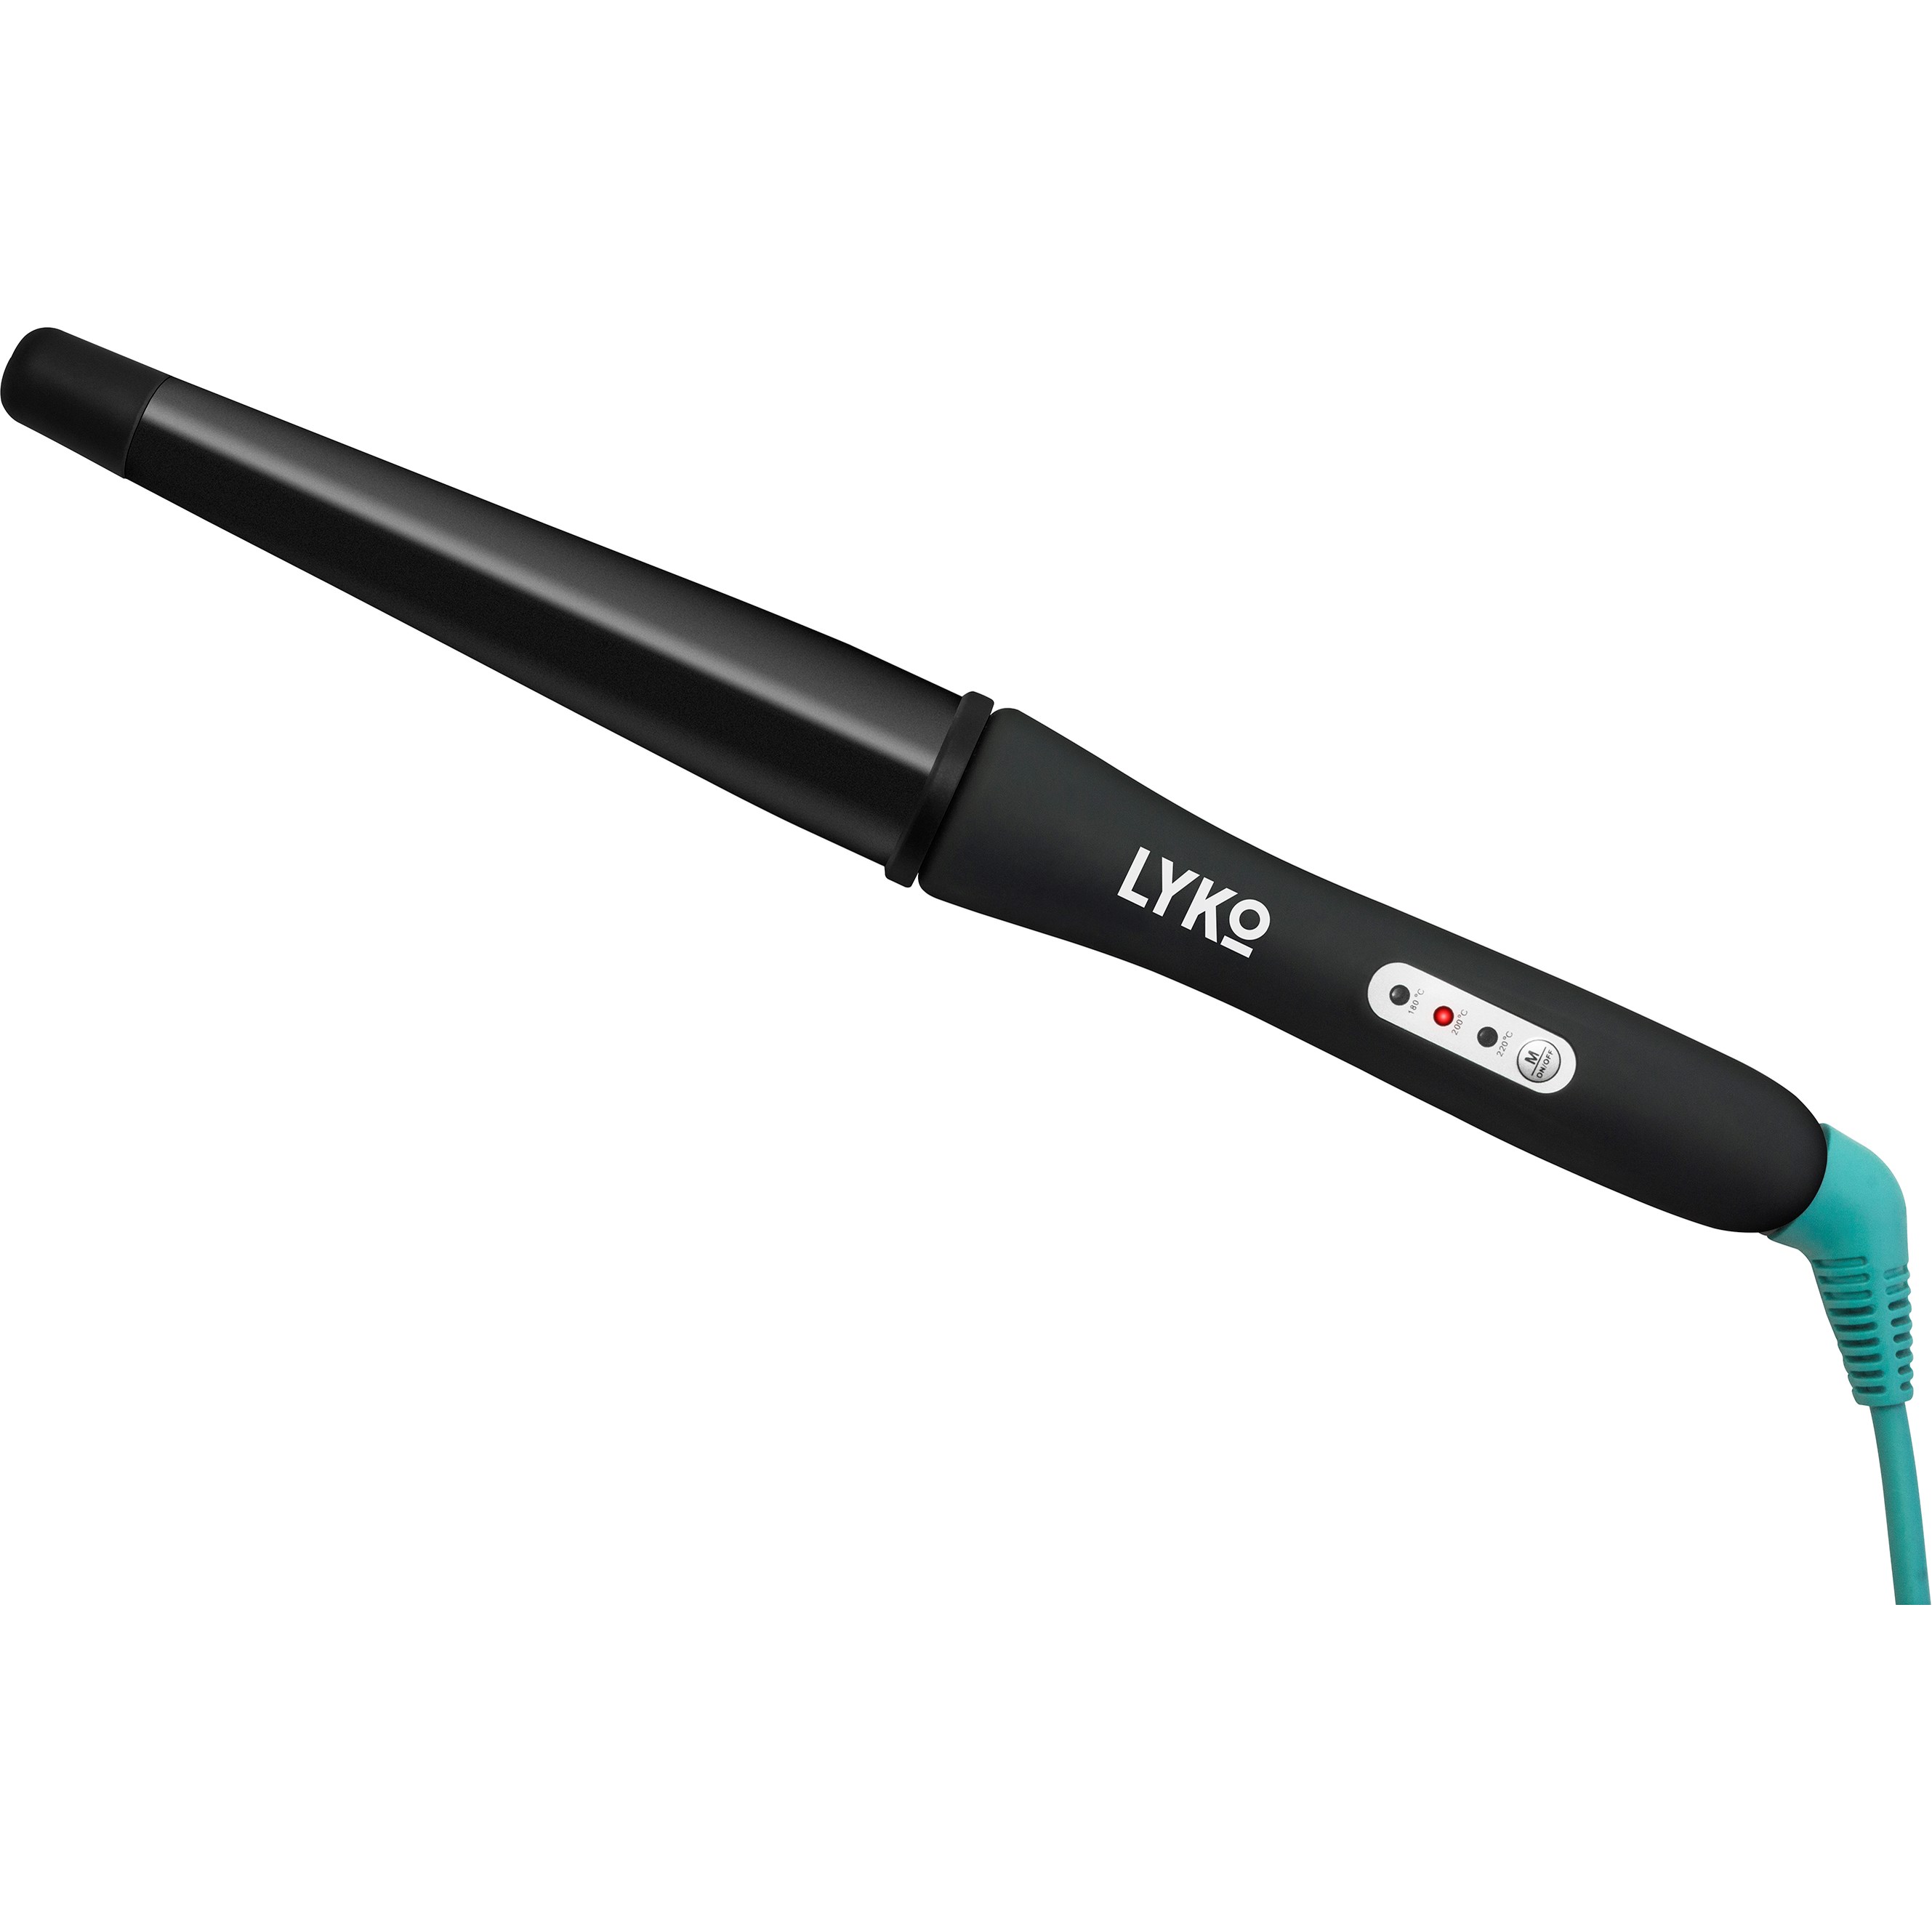 By Lyko Curling Iron 19-32mm 19 mm